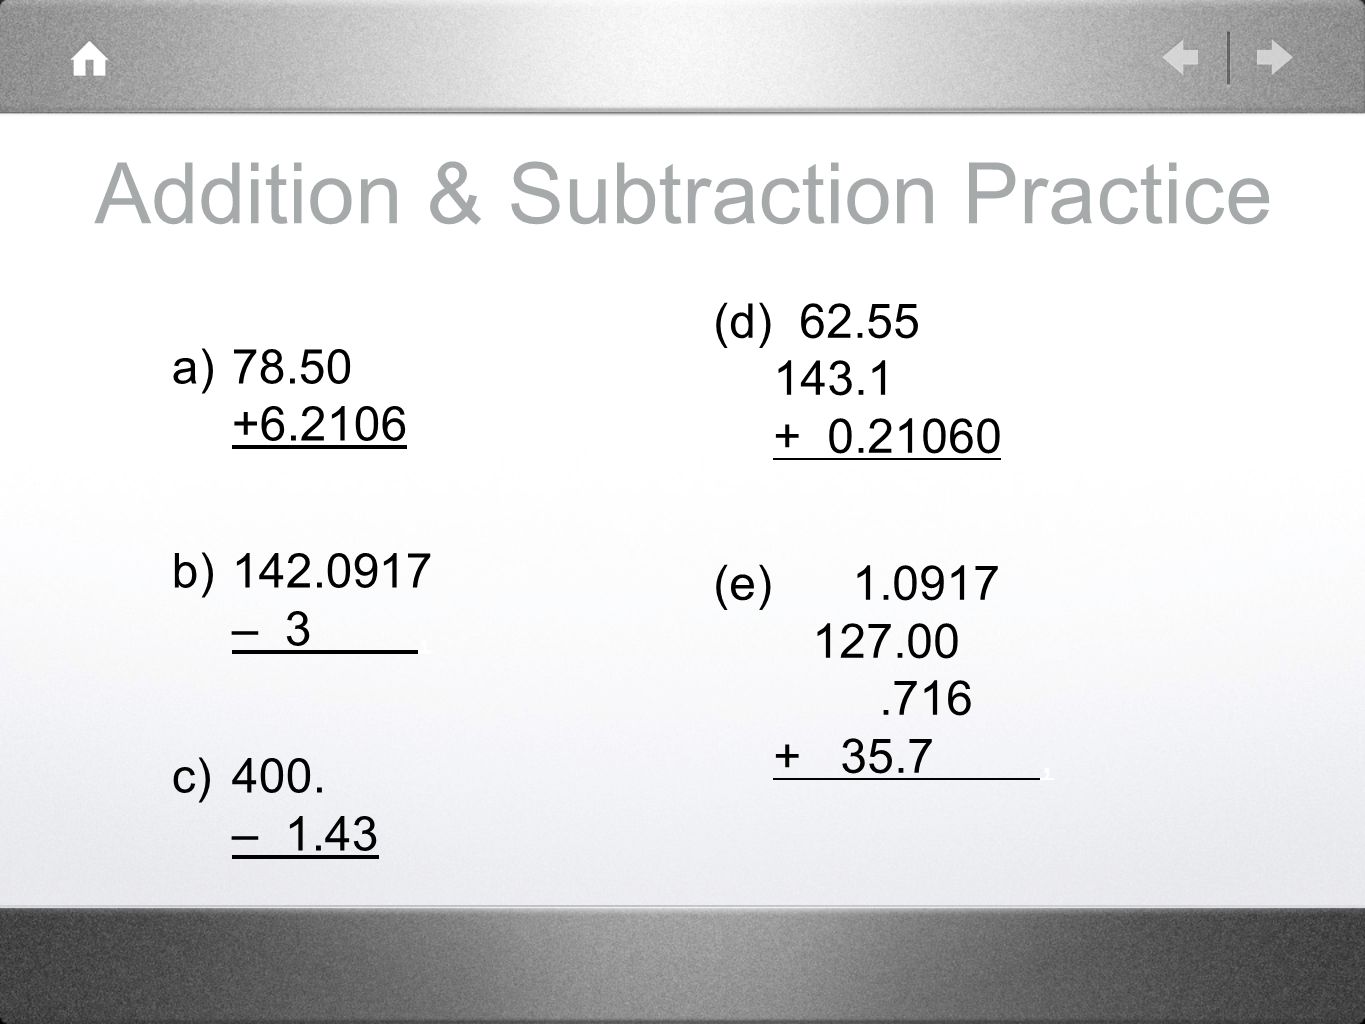 Addition & Subtraction Practice a) b) – 3, c) 400.